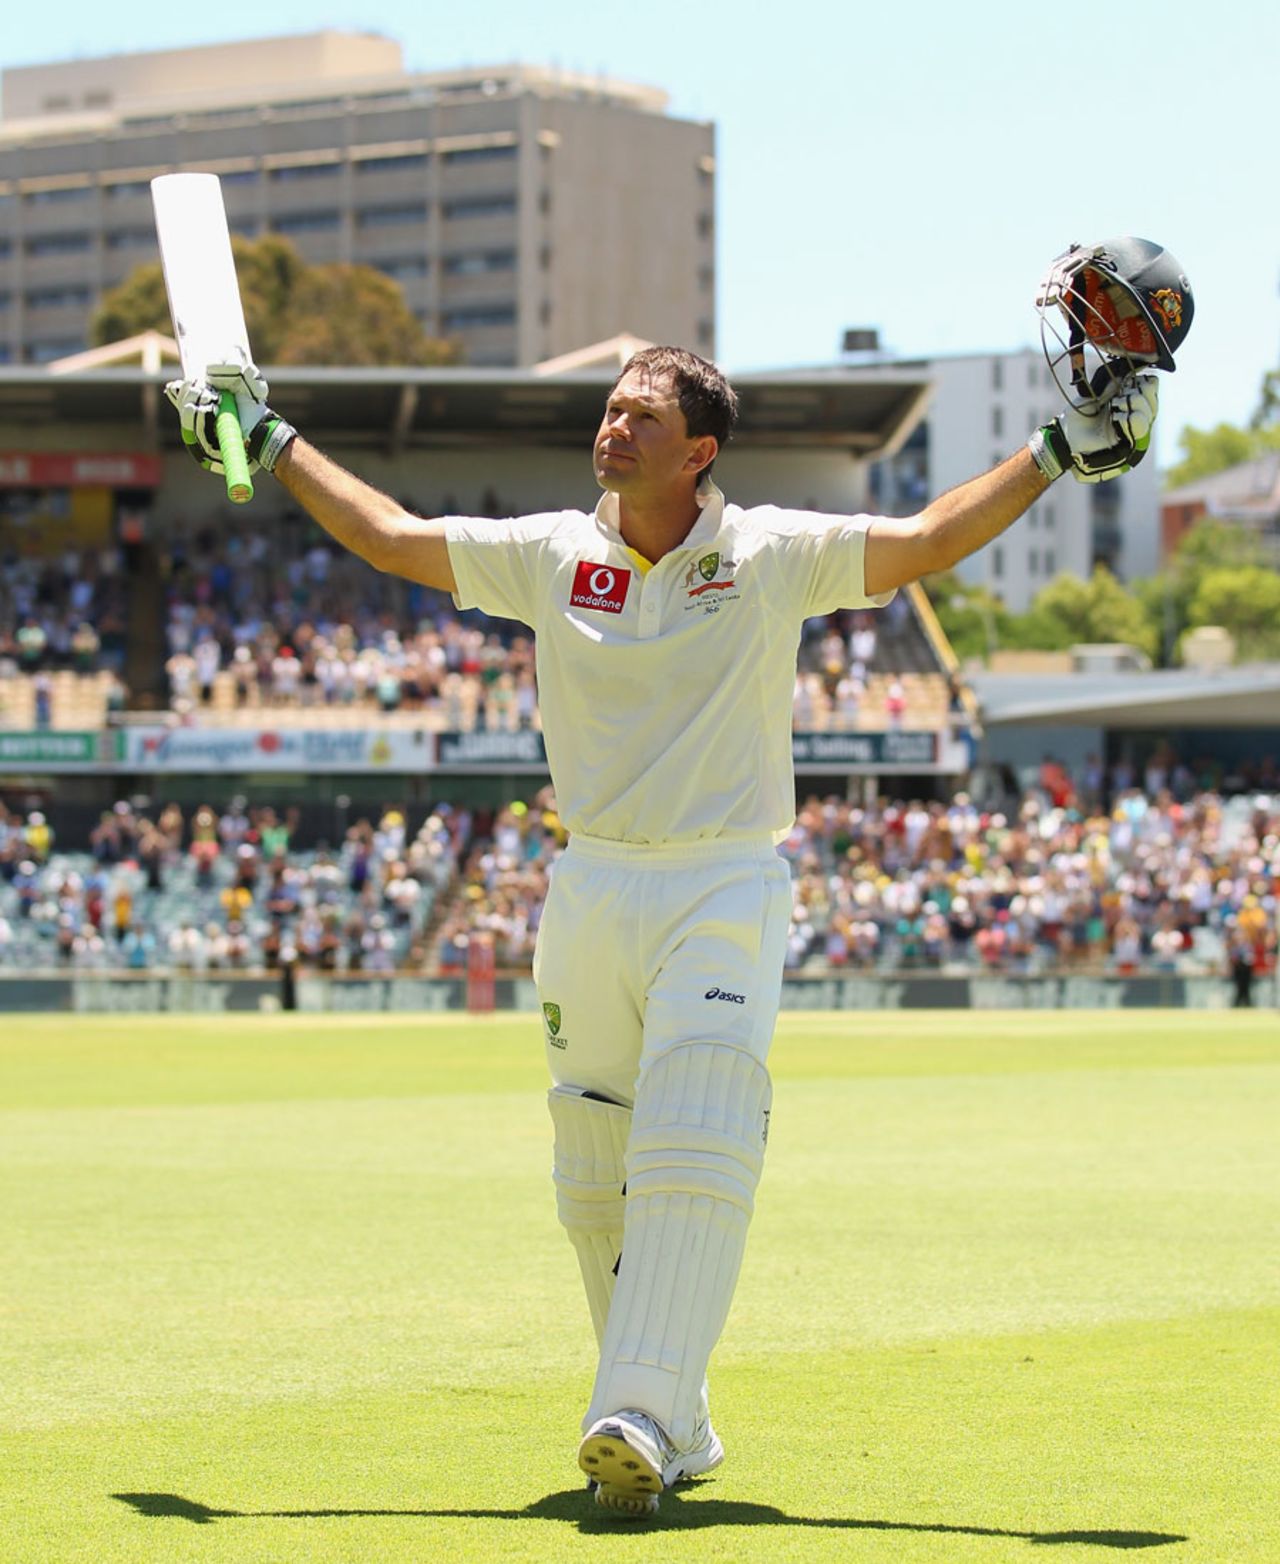 Ricky Ponting salutes the crowd after being dismissed for the last time in international cricket, Australia v South Africa, 3rd Test, Perth, 4th day, December 3, 2012